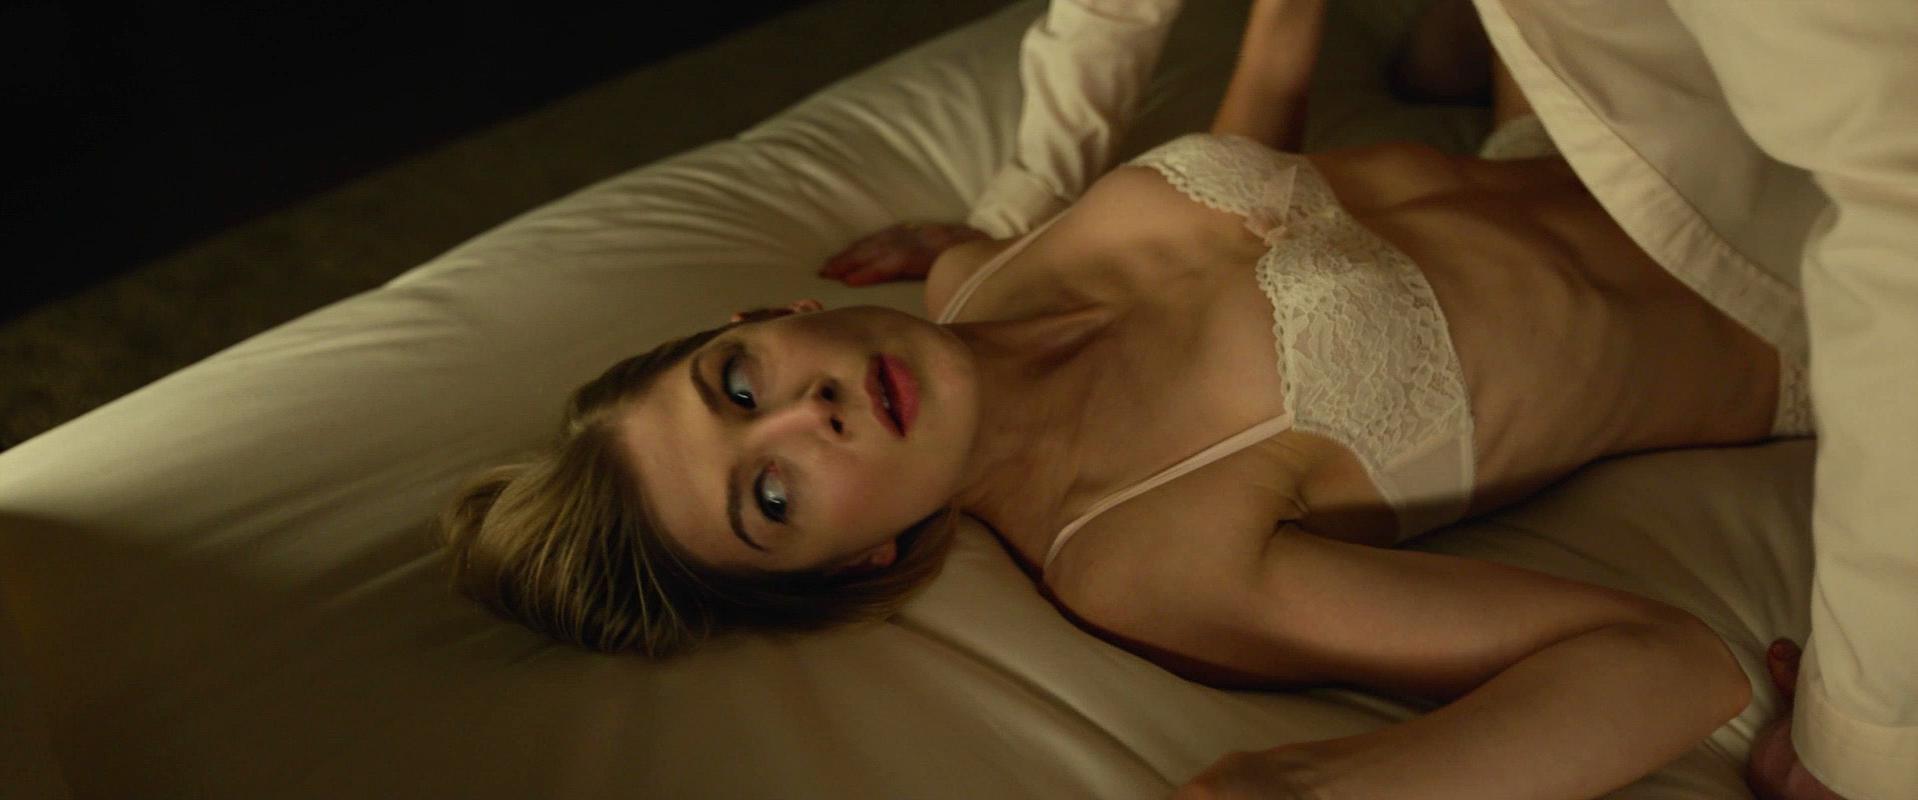 Best of Naked pictures of rosamund pike